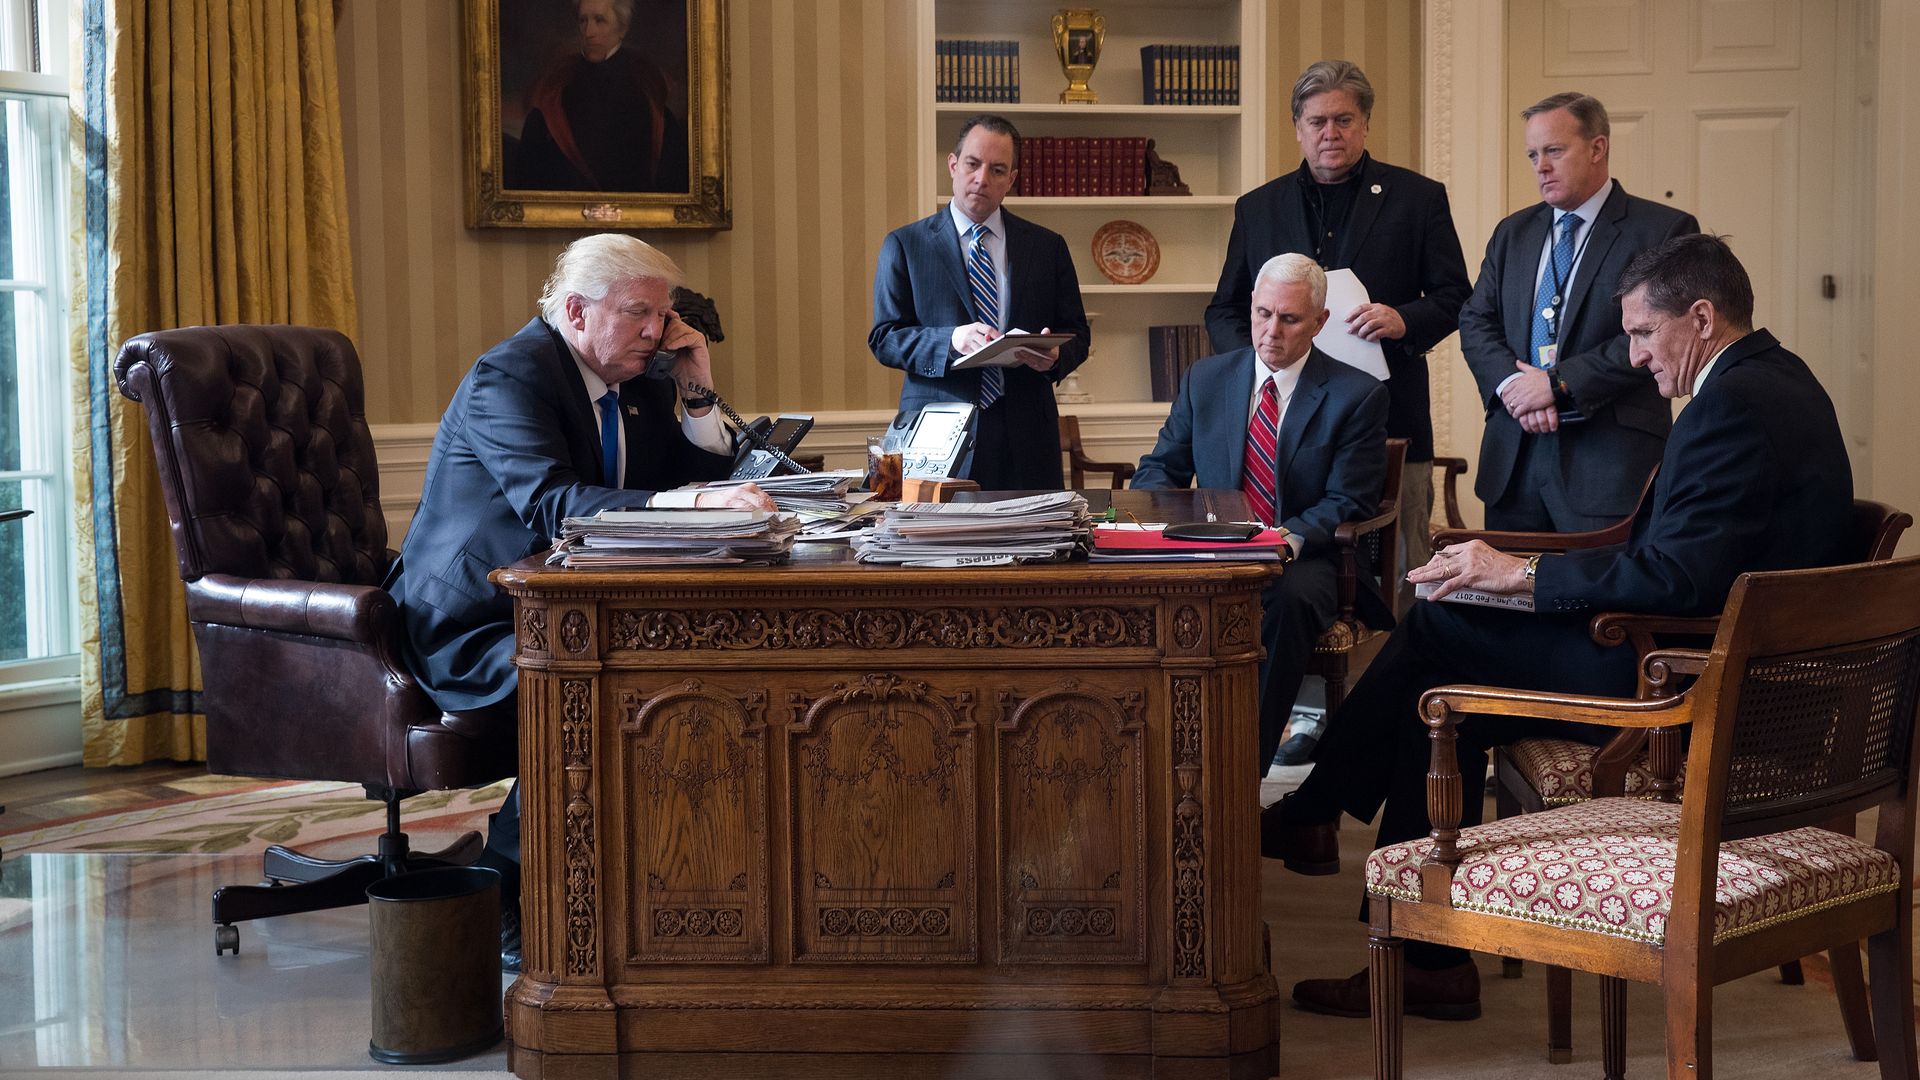 Trump sits in the Oval Office in January 2017. The only people in this photo who still work at the White House are Trump and Pence. Photo: Drew Angerer/Getty Images